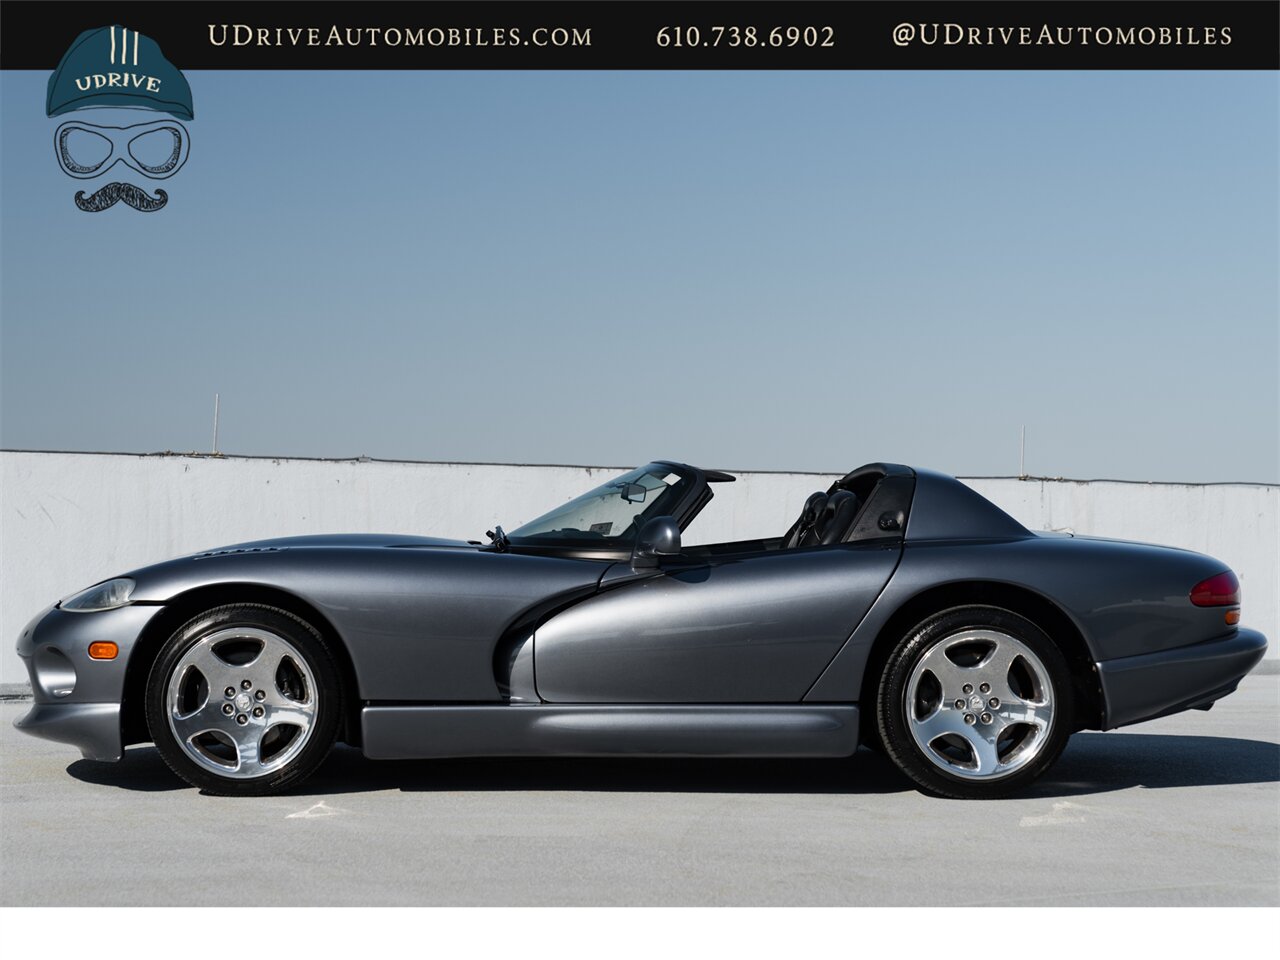 2000 Dodge Viper RT/10 Roadster  20k Miles - Photo 9 - West Chester, PA 19382